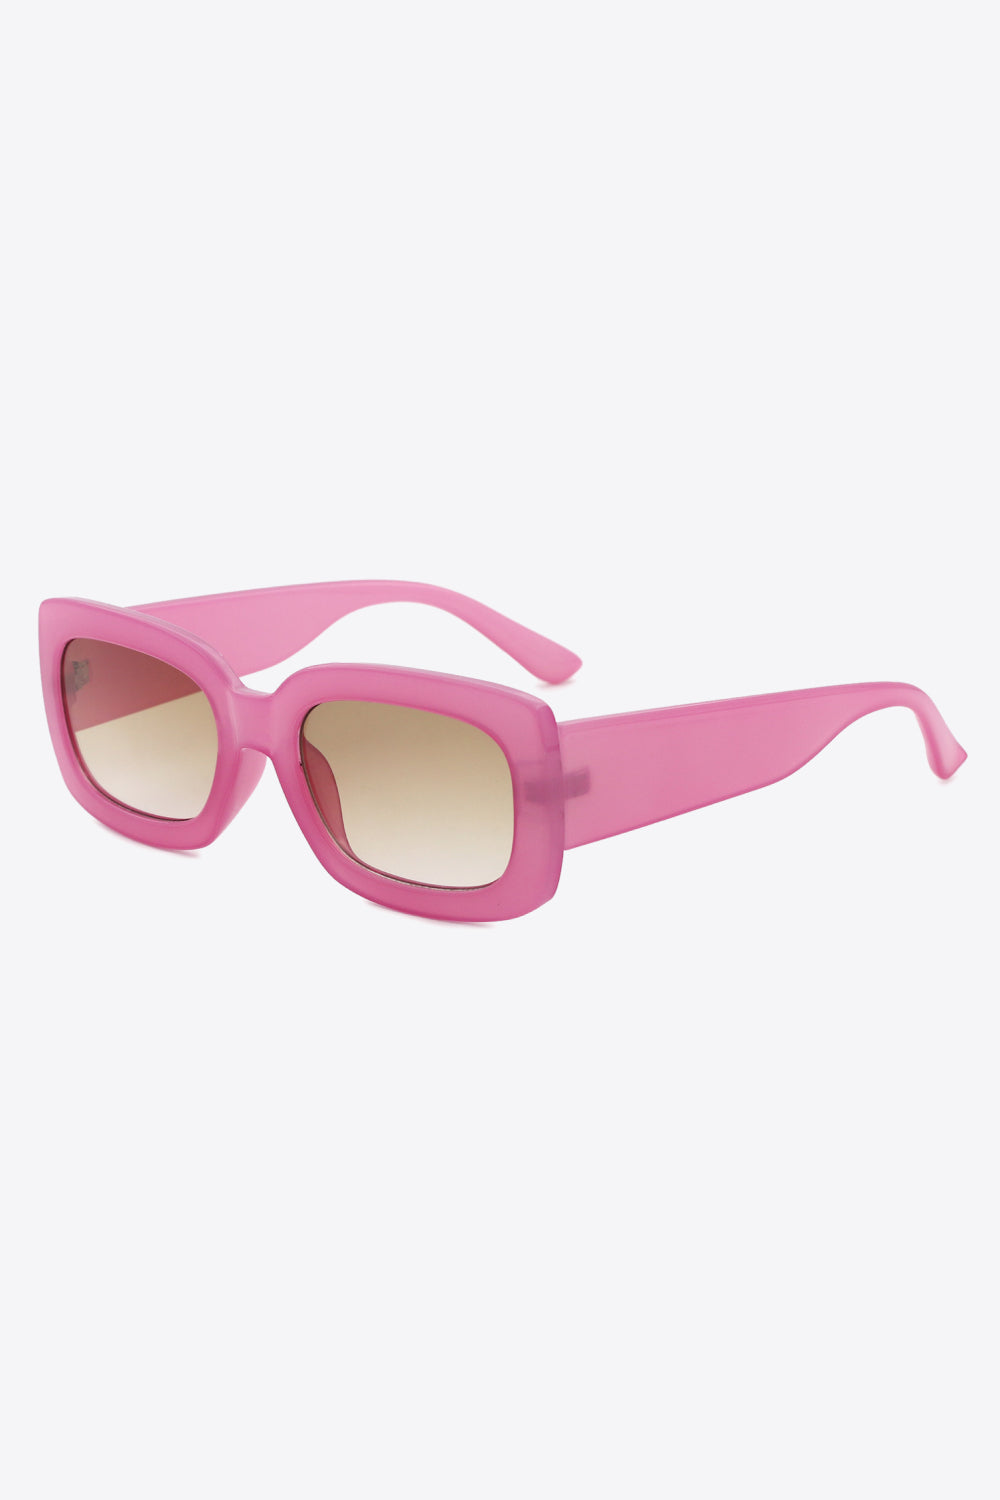 Blocks and Boundaries Polycarbonate Rectangle Sunglasses in Pink and Black